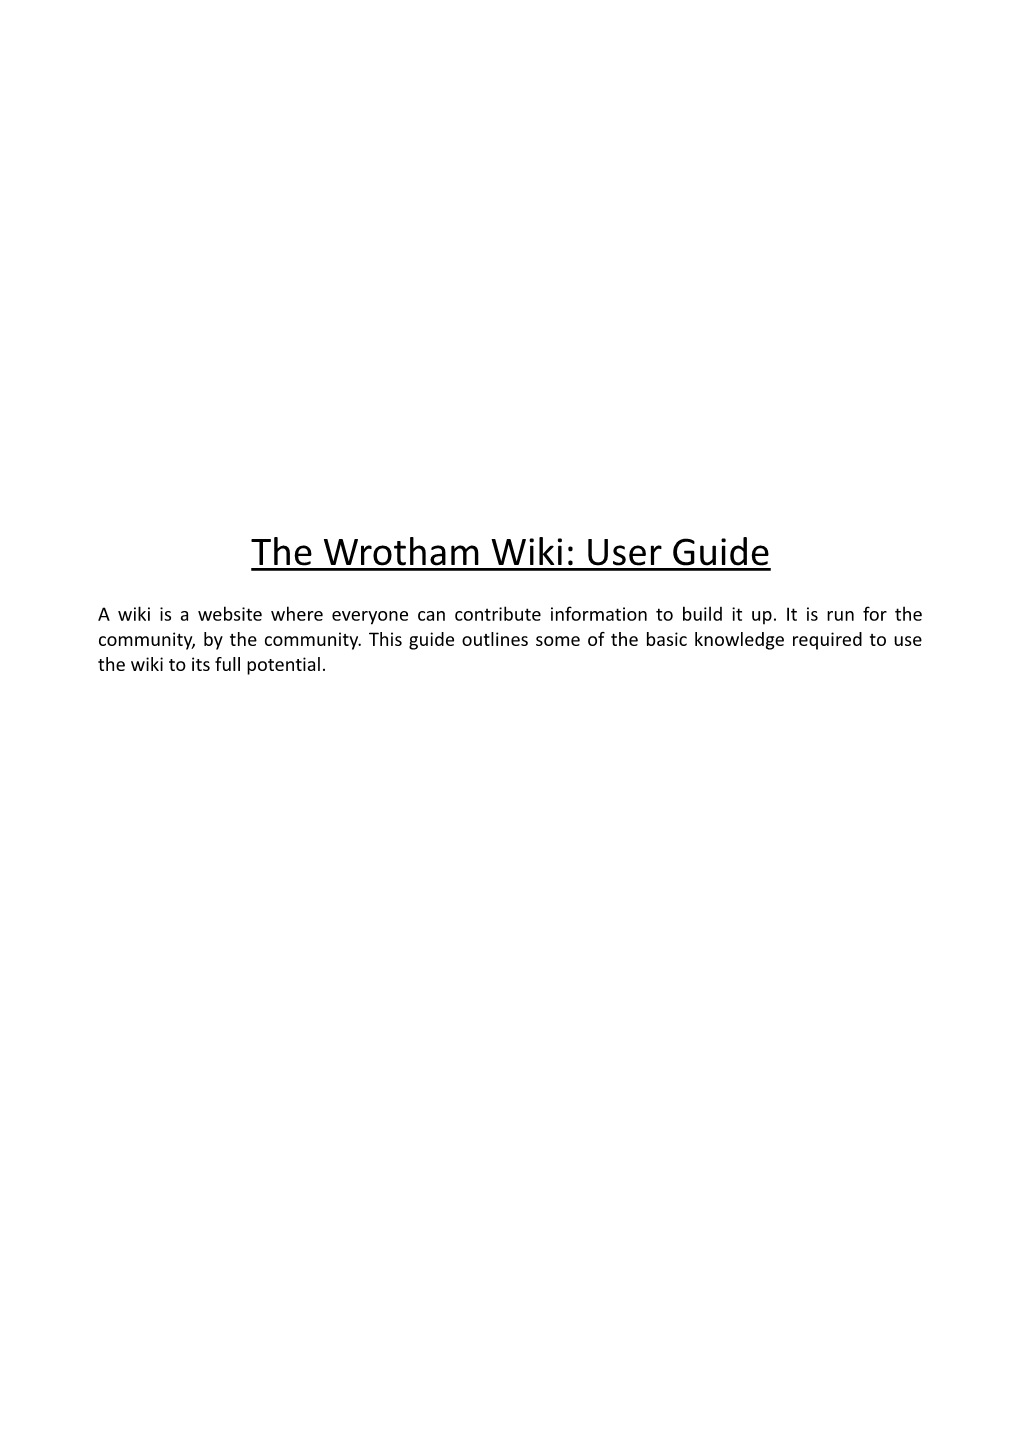 The Wrotham Wiki: User Guide